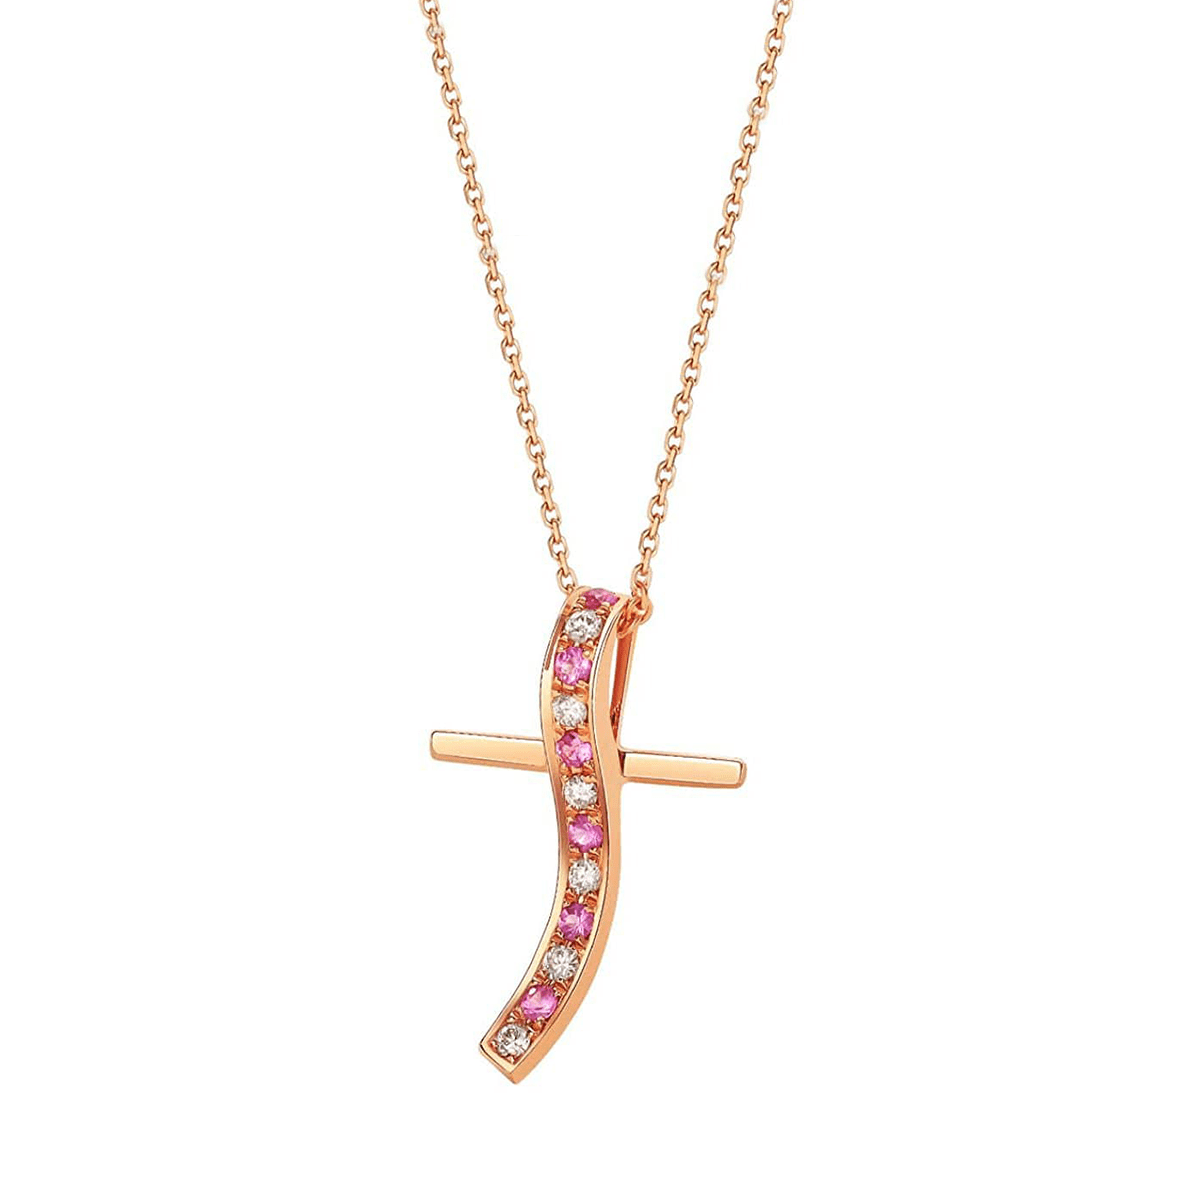 Color gemstone pink sapphire and white diamond rose gold pendant necklace on 18k rose gold cable chain